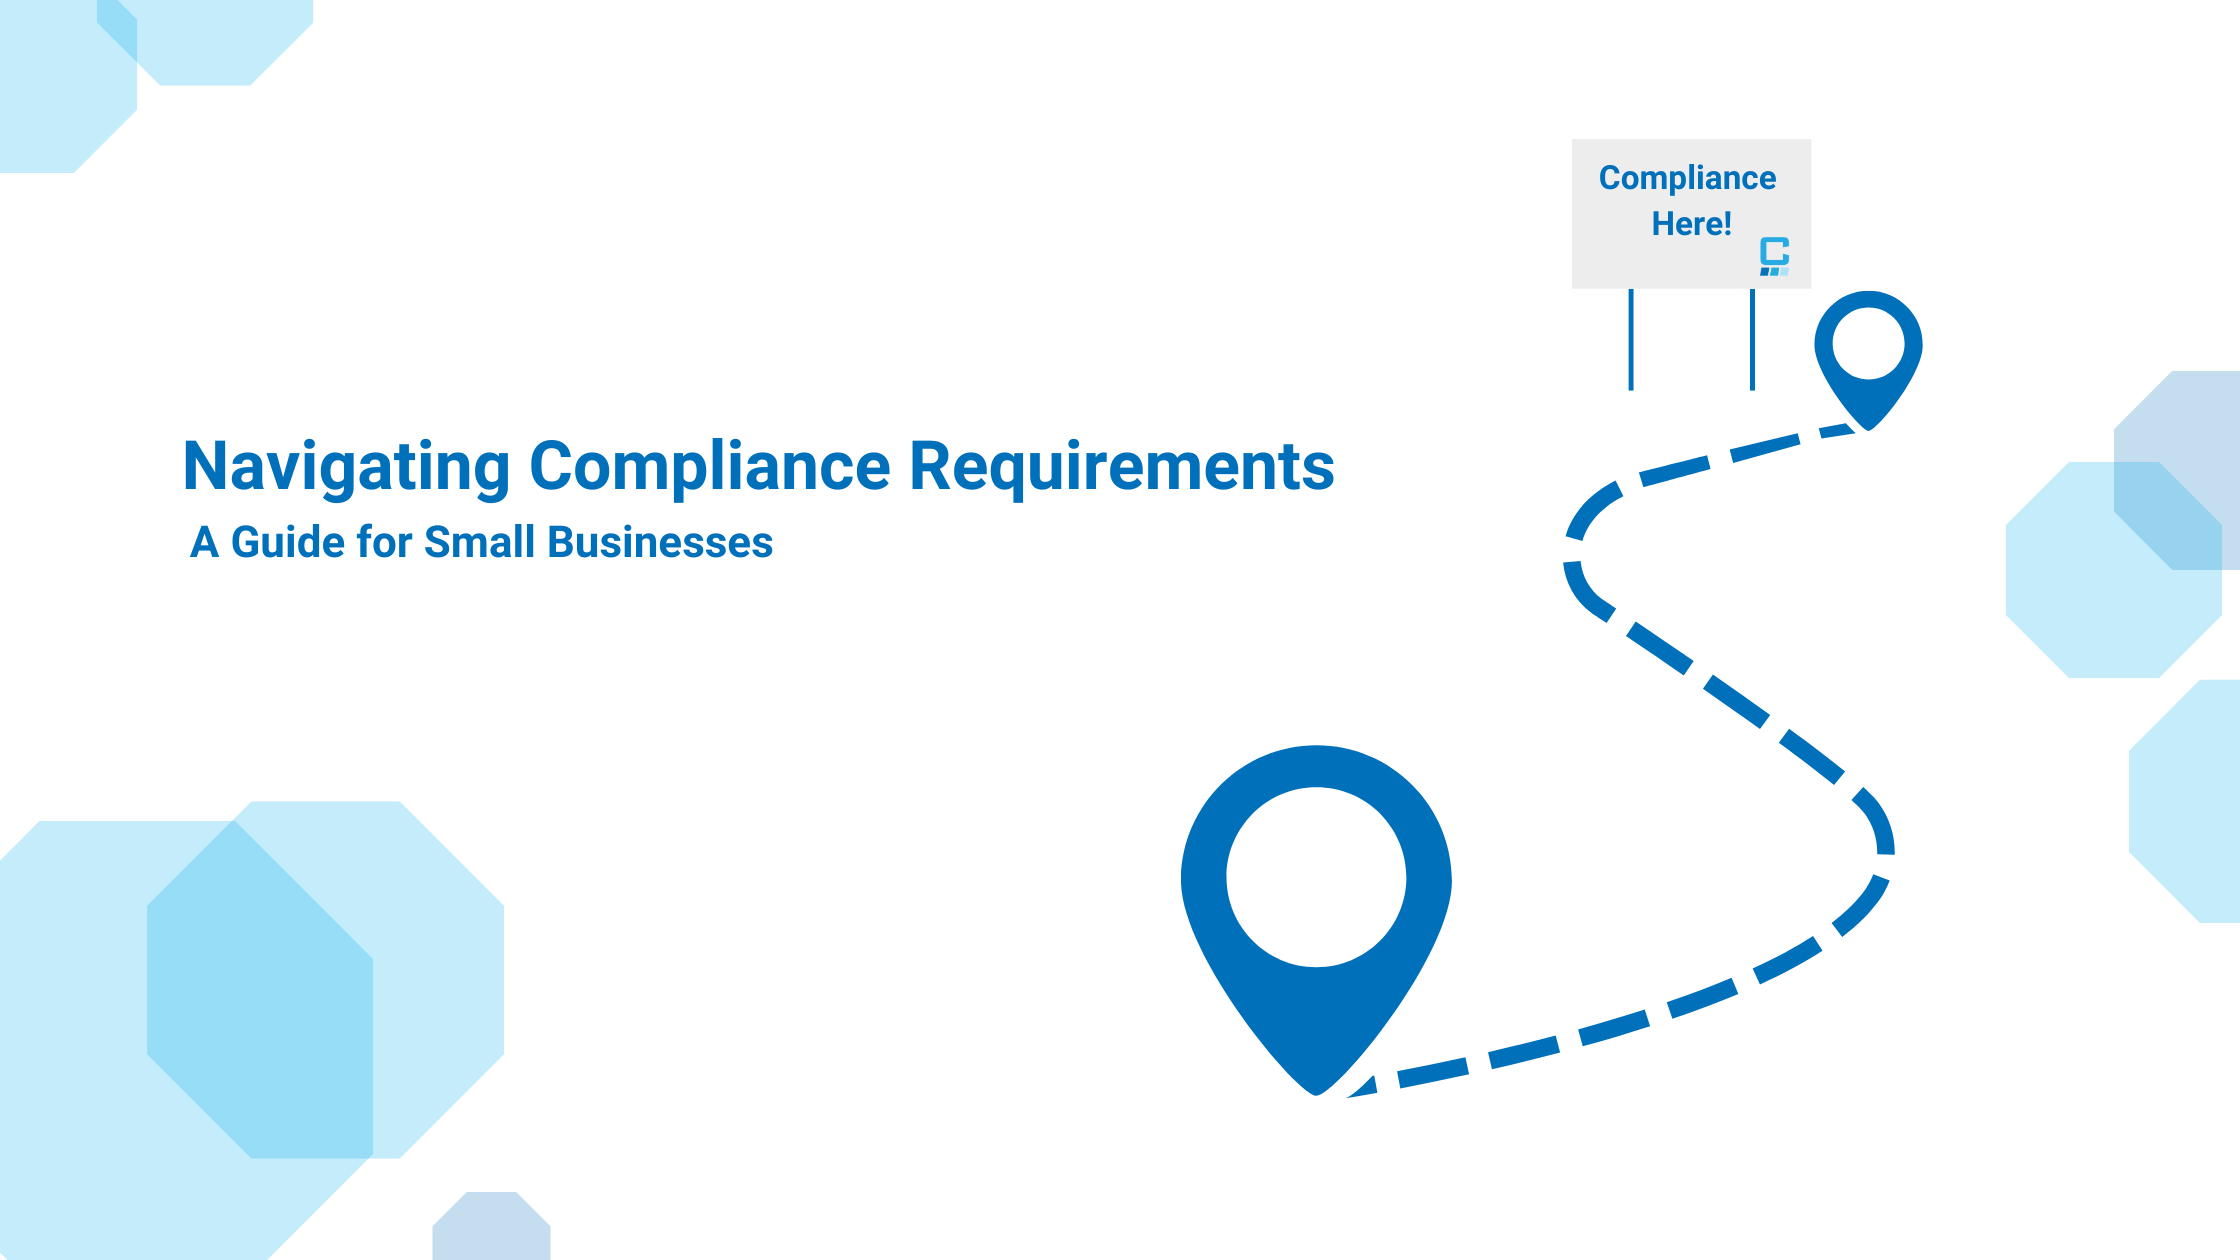 Navigating Compliance Requirements: A Guide for Small Businesses